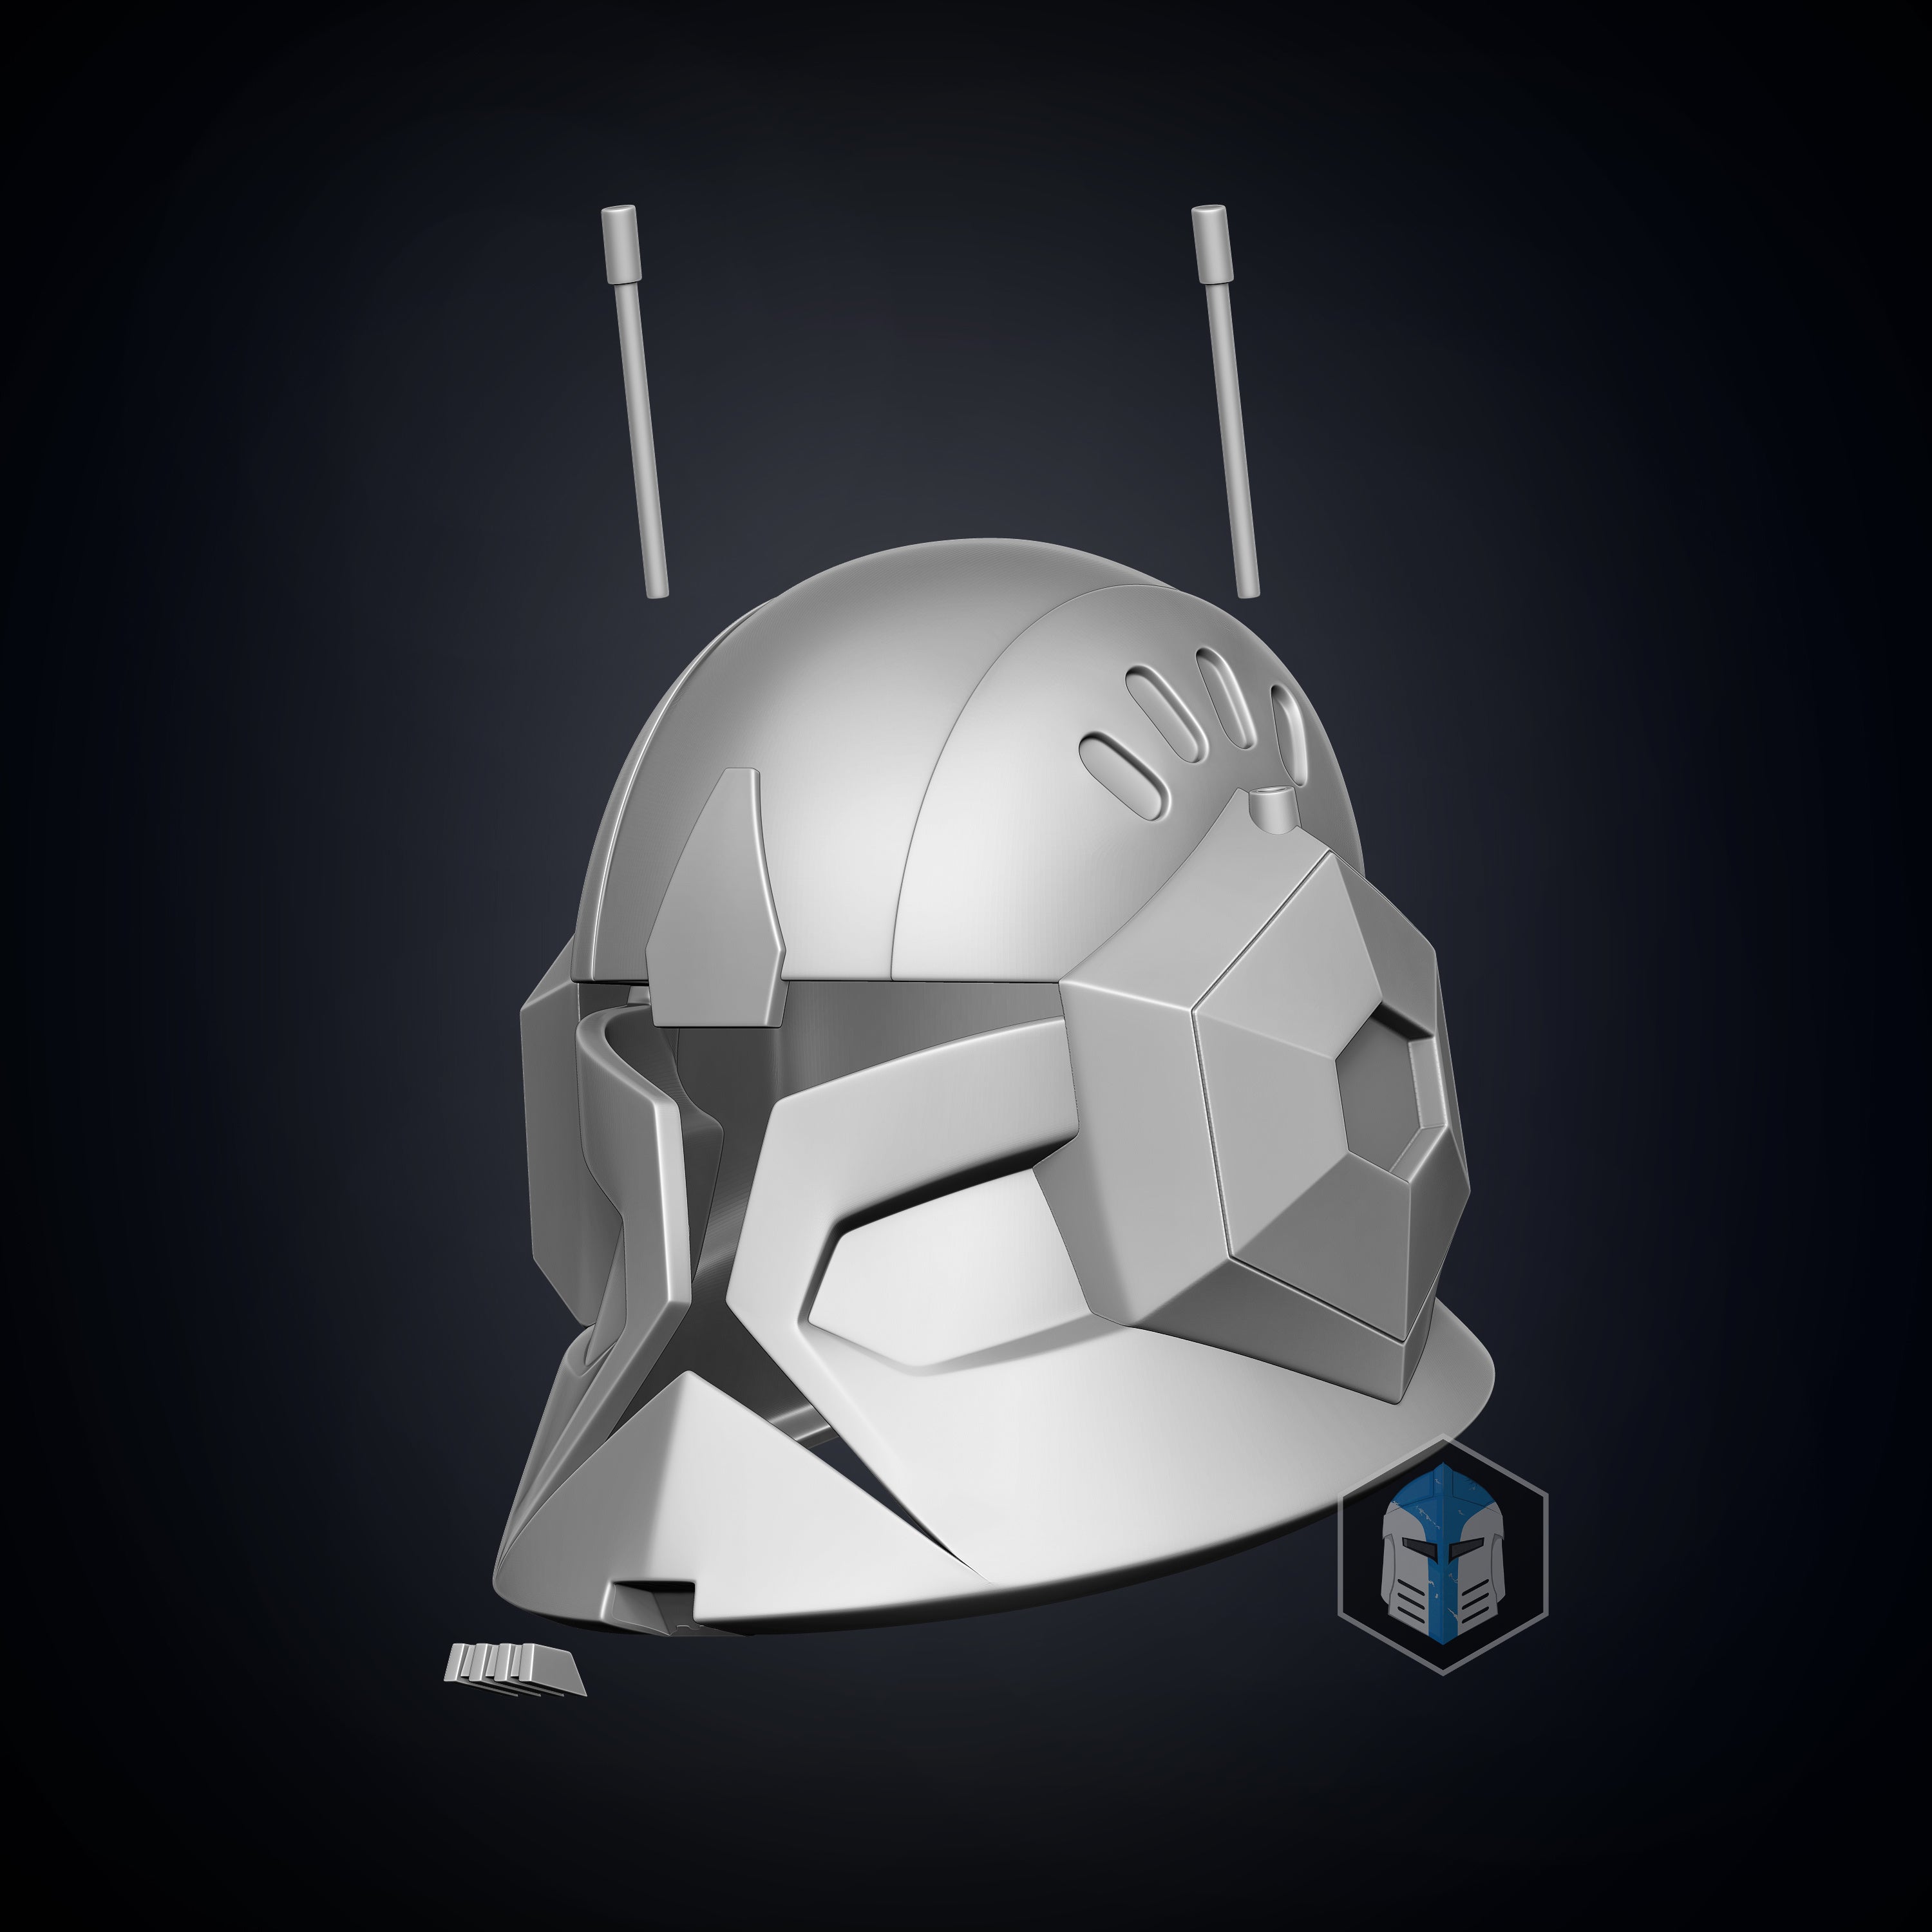 Animated Spec Ops Clone Trooper Helmet - 3D Print Files - Galactic Armory